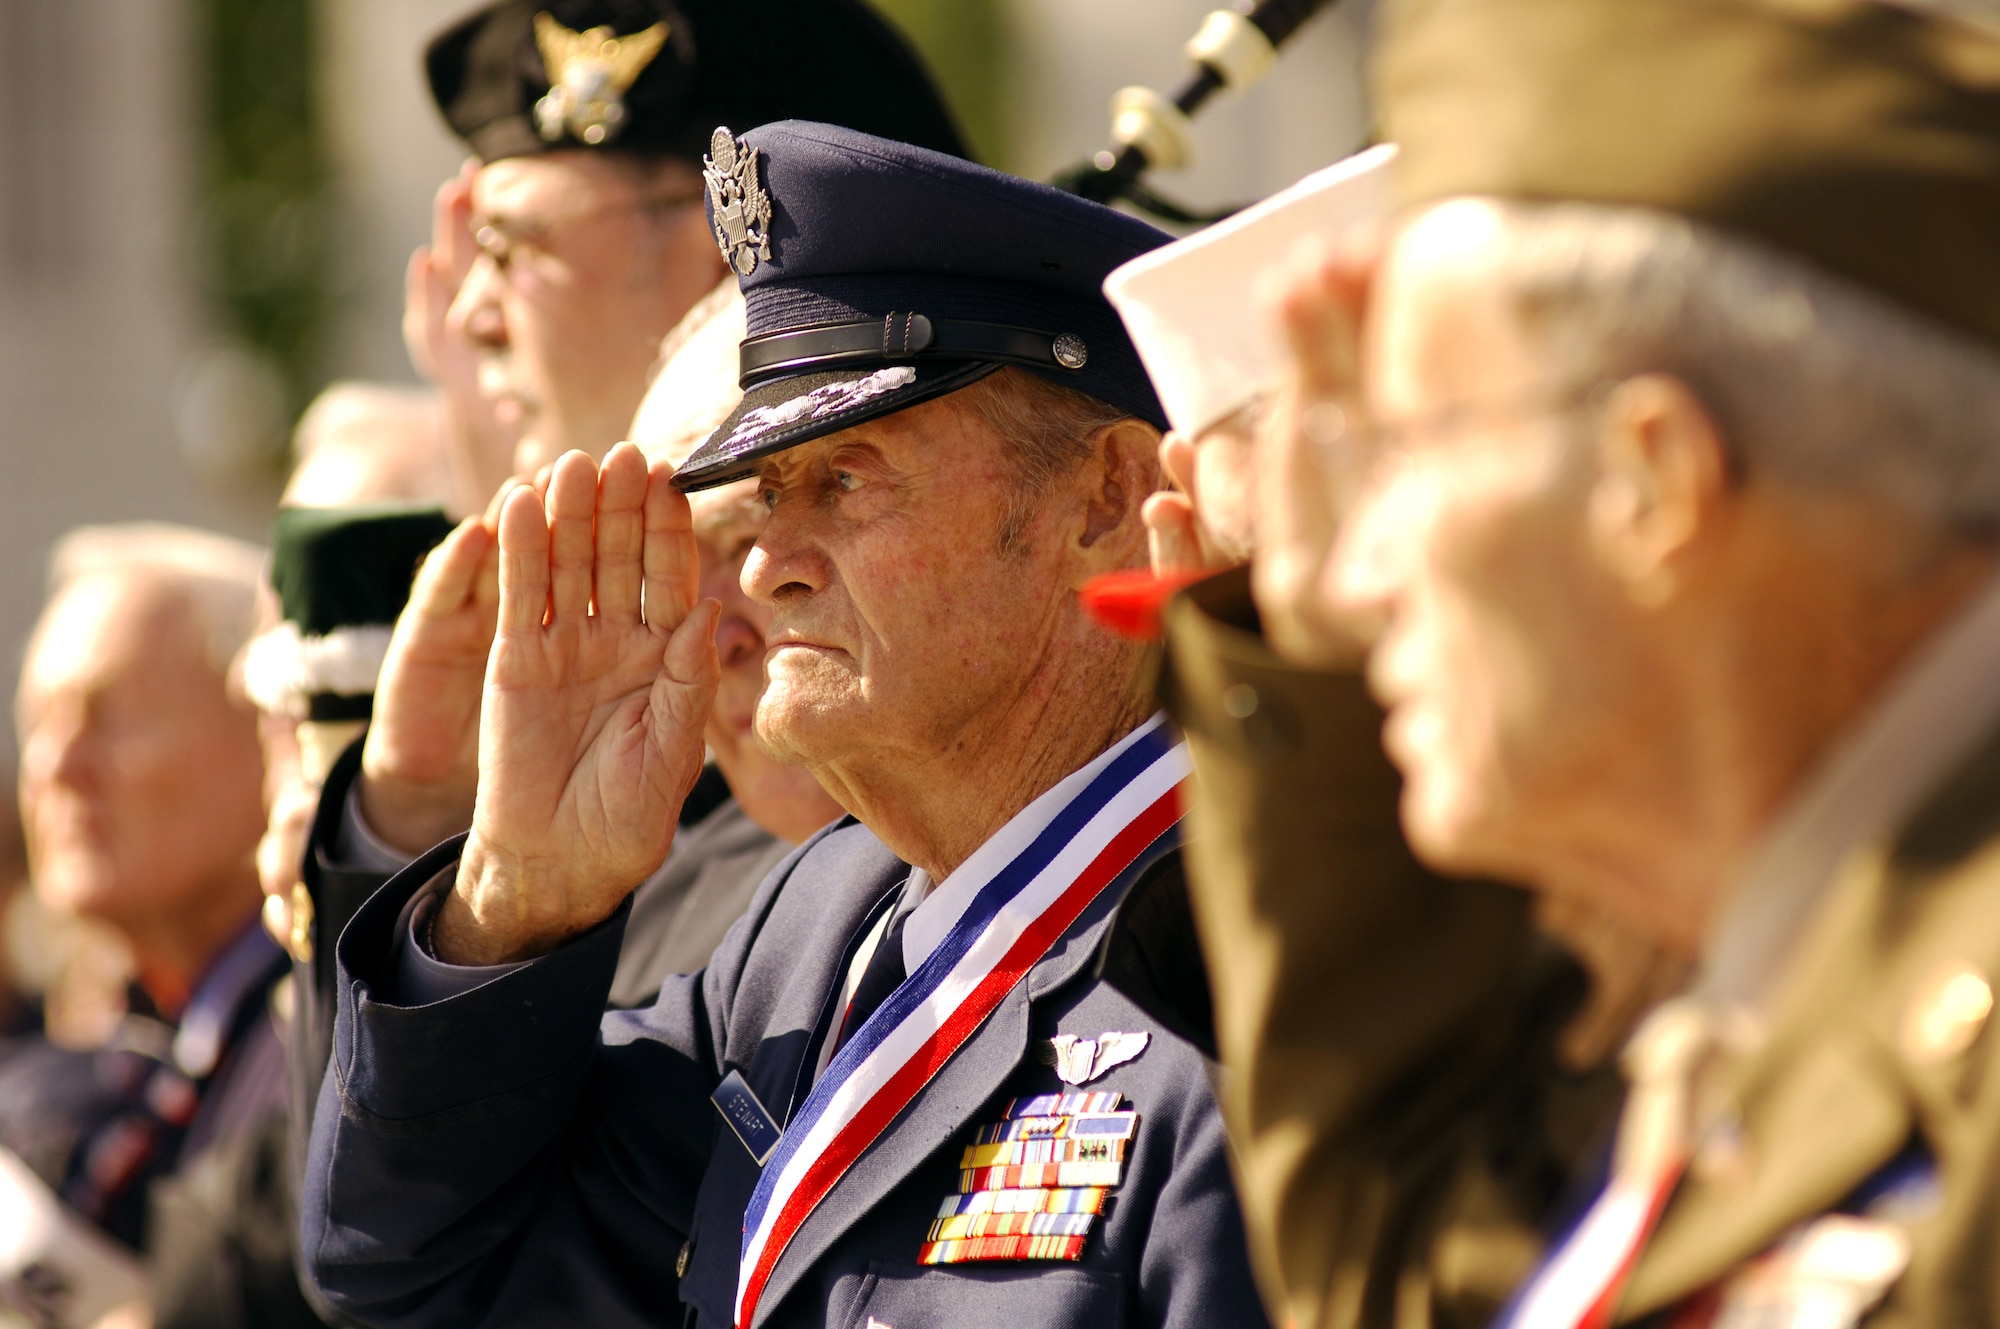 Retired Col. Walt Stewart stands and salutes the colors with fellow World War II veterans during a ceremony for Hero Flight 2007 at the National World War II Memorial in Washington, D.C., Sept. 15. Hero Flight is an all-volunteer program that sets up trips to allow as many World War II veterans as possible to visit the National World War II Memorial. (U.S. Air Force photo/Staff Sgt. Suzanne Day)
